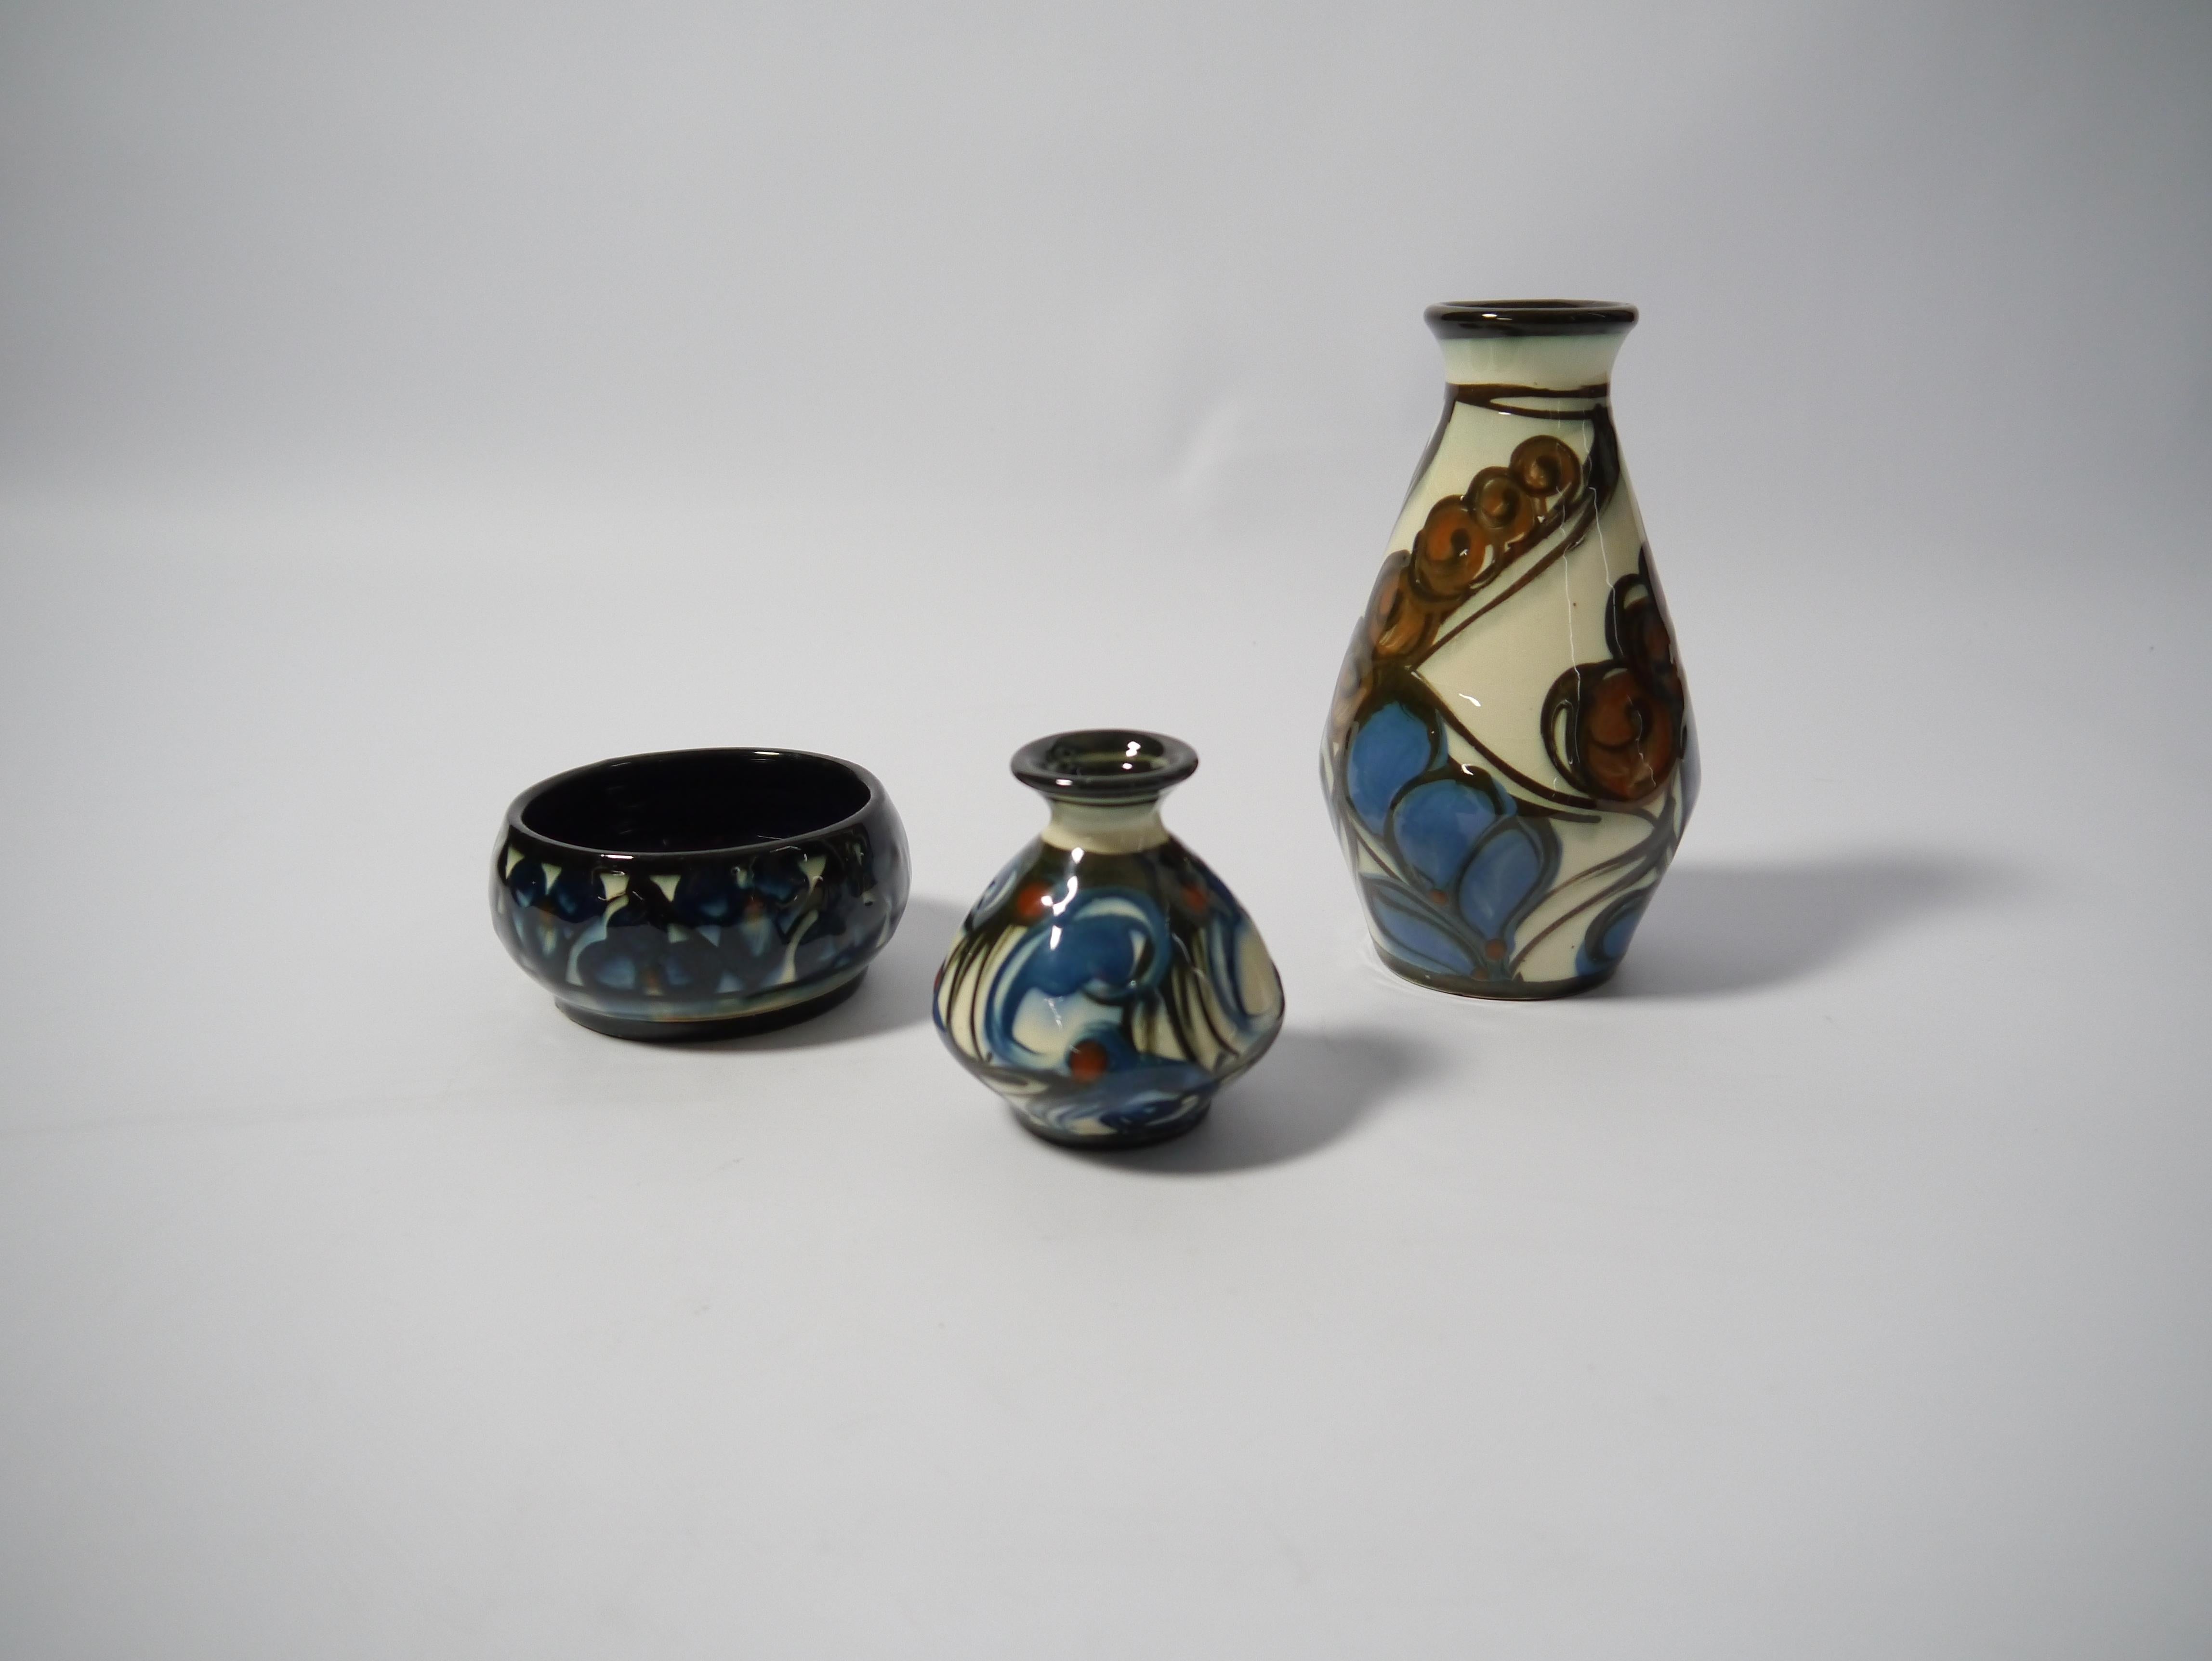 Set of three Art Deco ceramic vessels, containing two vases and a bowl, made by Danish ceramic studio Danico (1919-1929) in the 1920s.